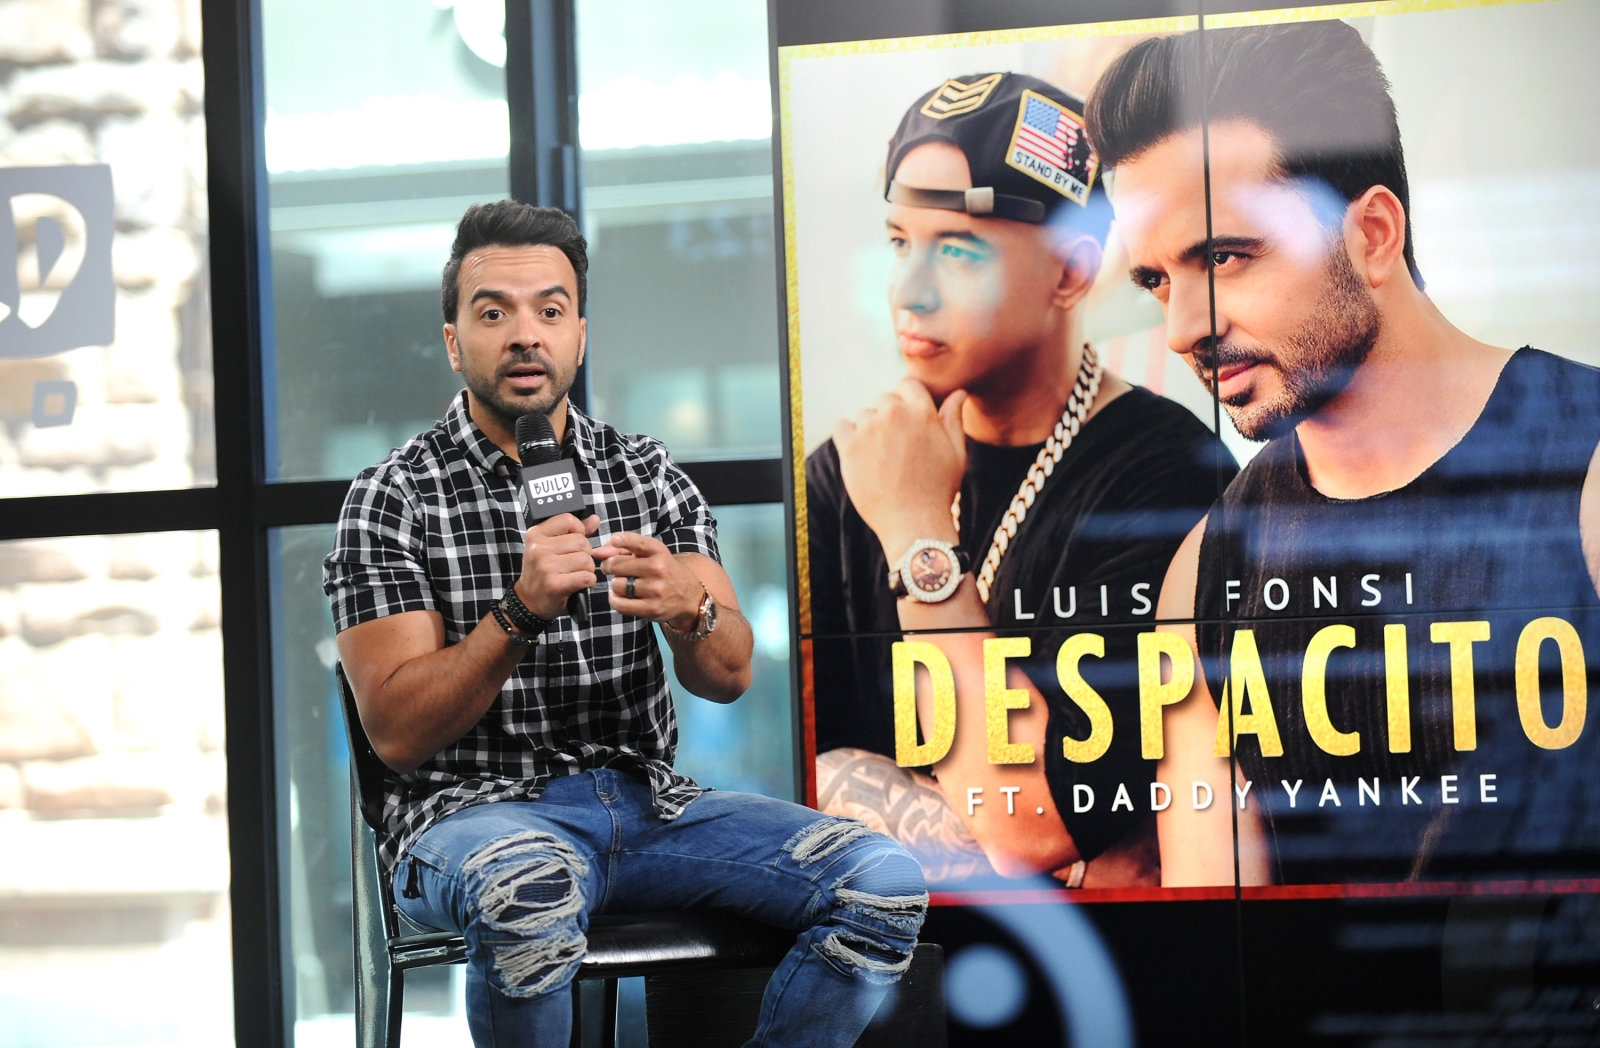 Luis Fonsi's 'Despacito' is the most-streamed song of all time | DeviceDaily.com